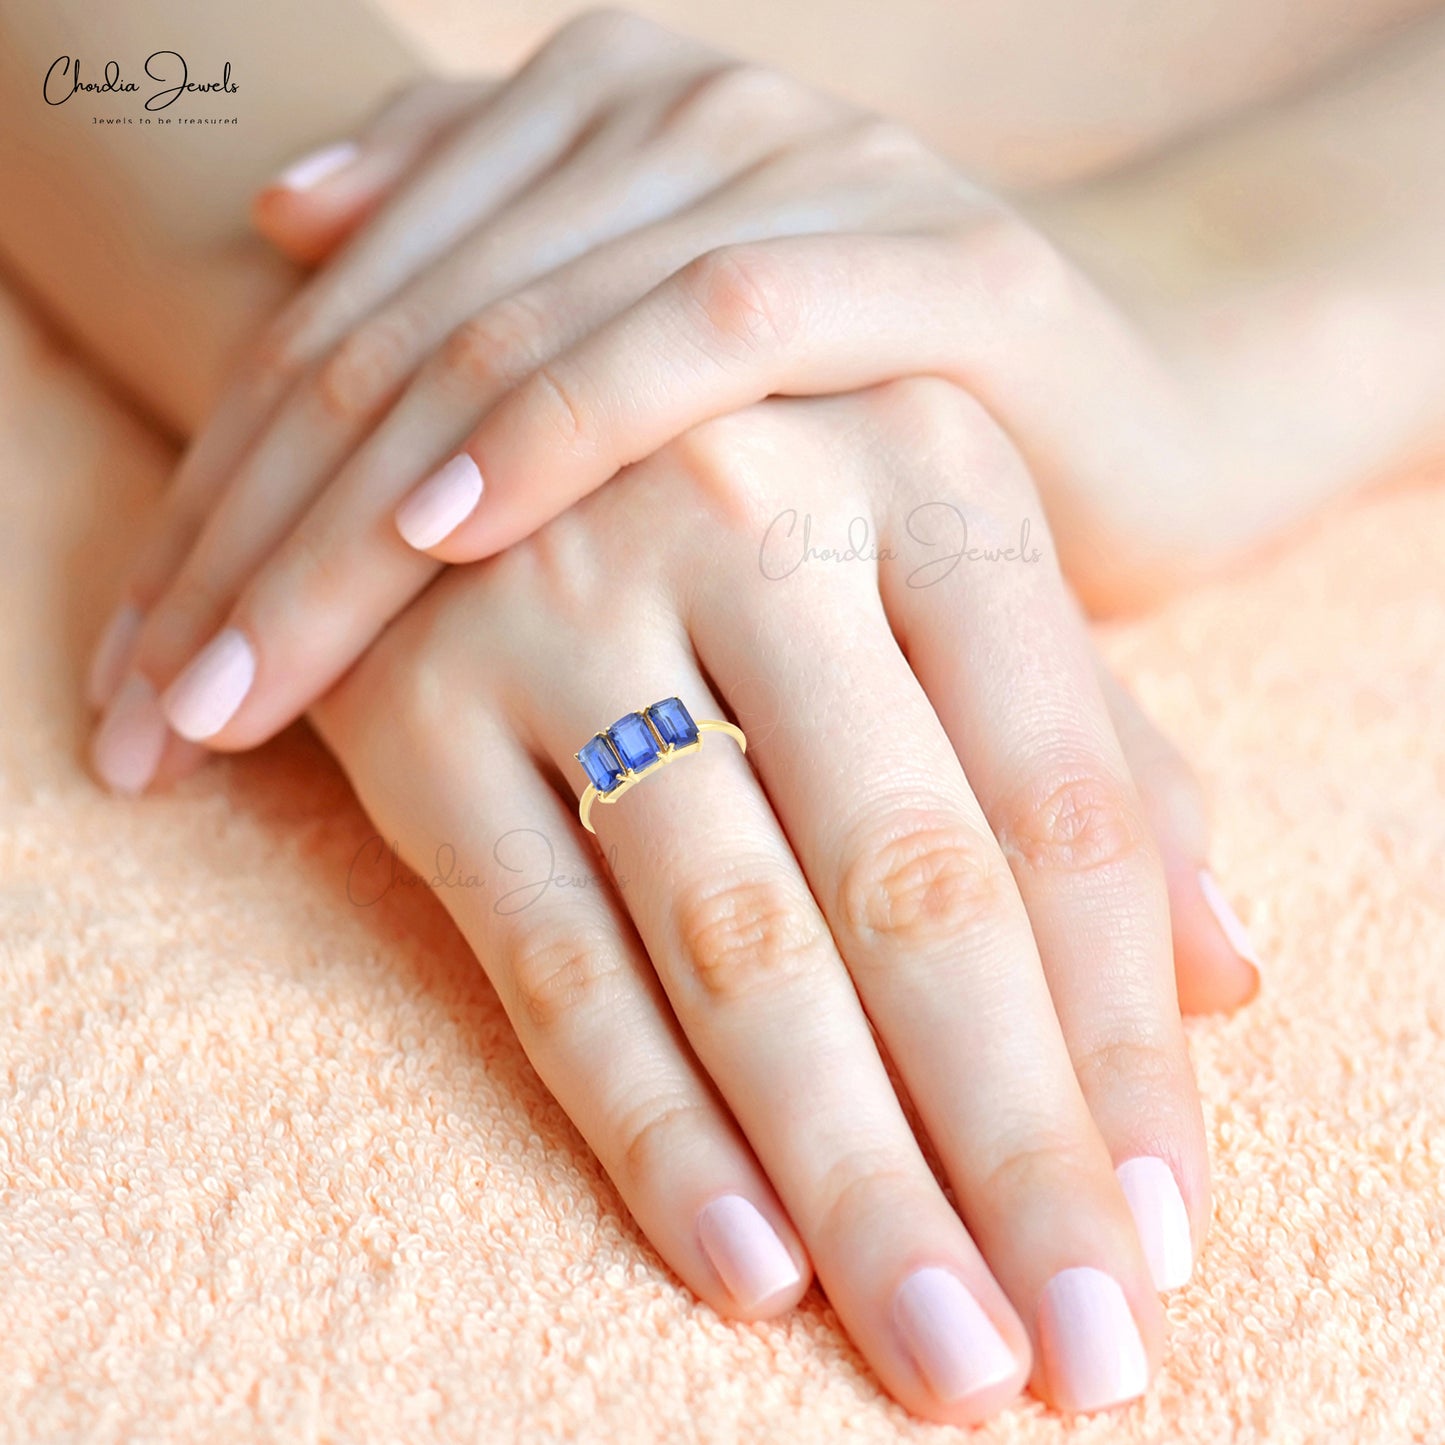 Top Grade 925 Sterling Silver 3 Stone Ring For Gift With Kyanite Gemstone Jewelry From Top Wholesaller At Offer Price